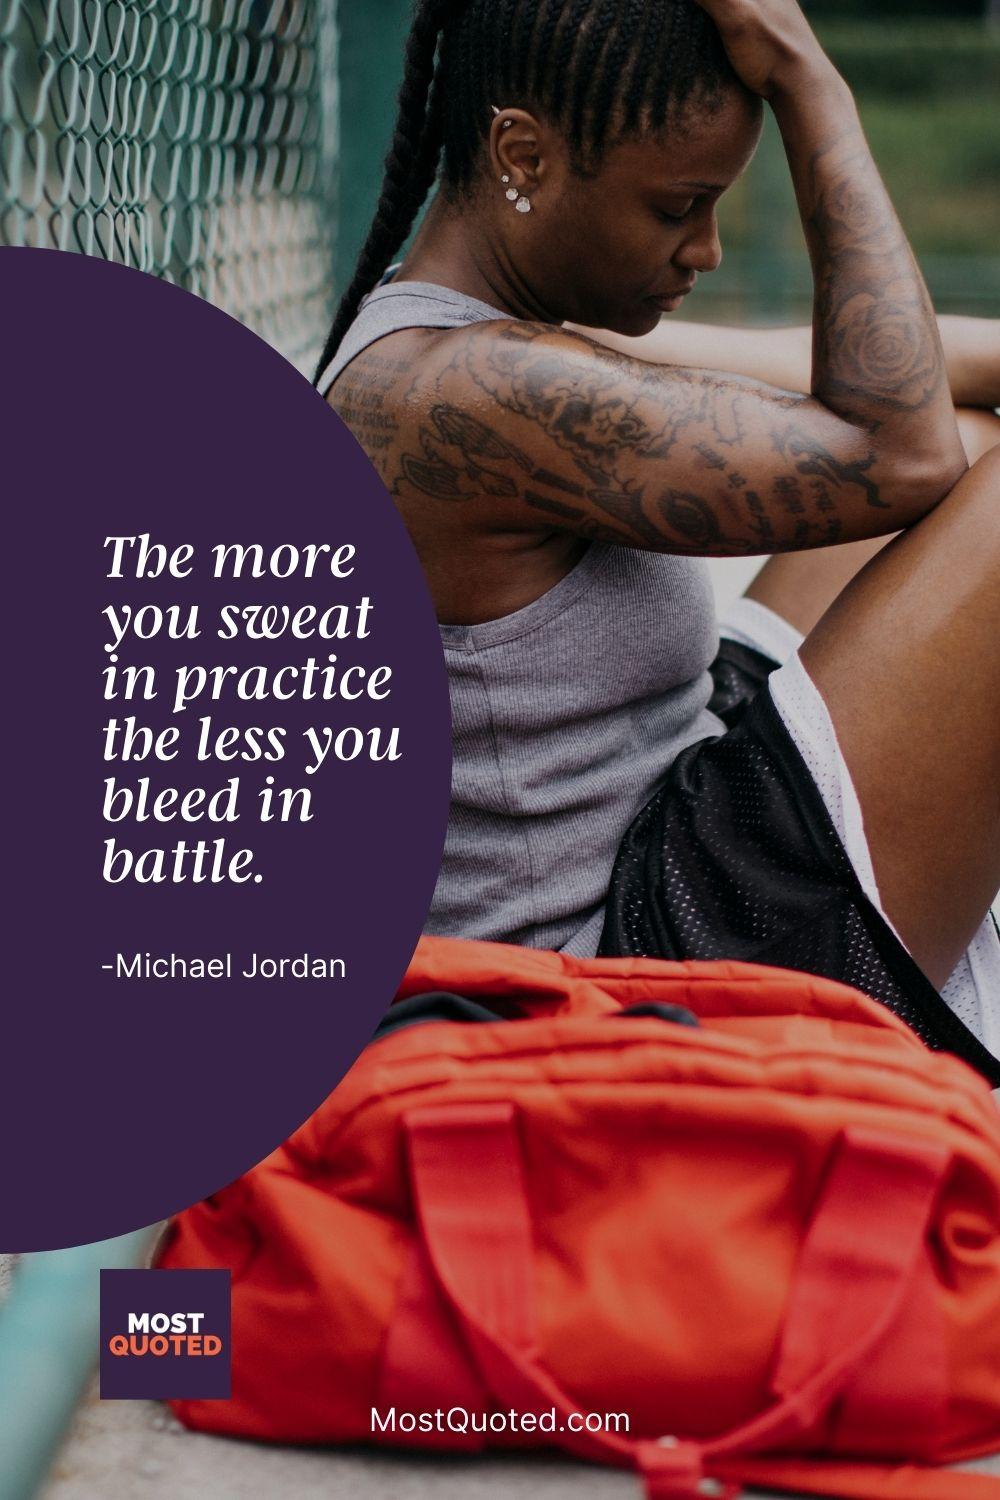 The more you sweat in practice the less you bleed in battle. - Michael Jordan